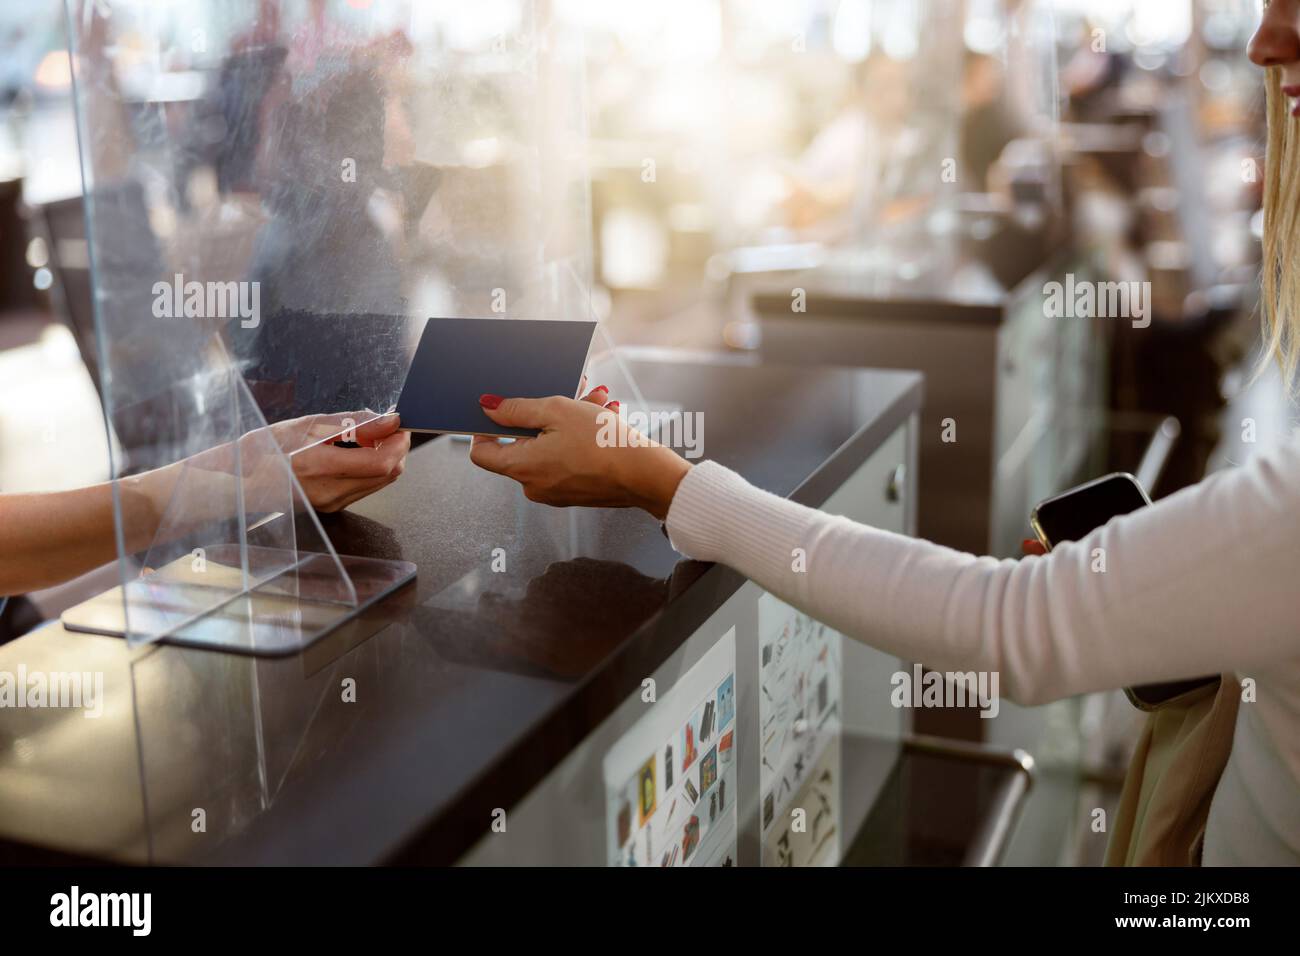 Female passenger handing over passport at check-in desk at airport Stock Photo